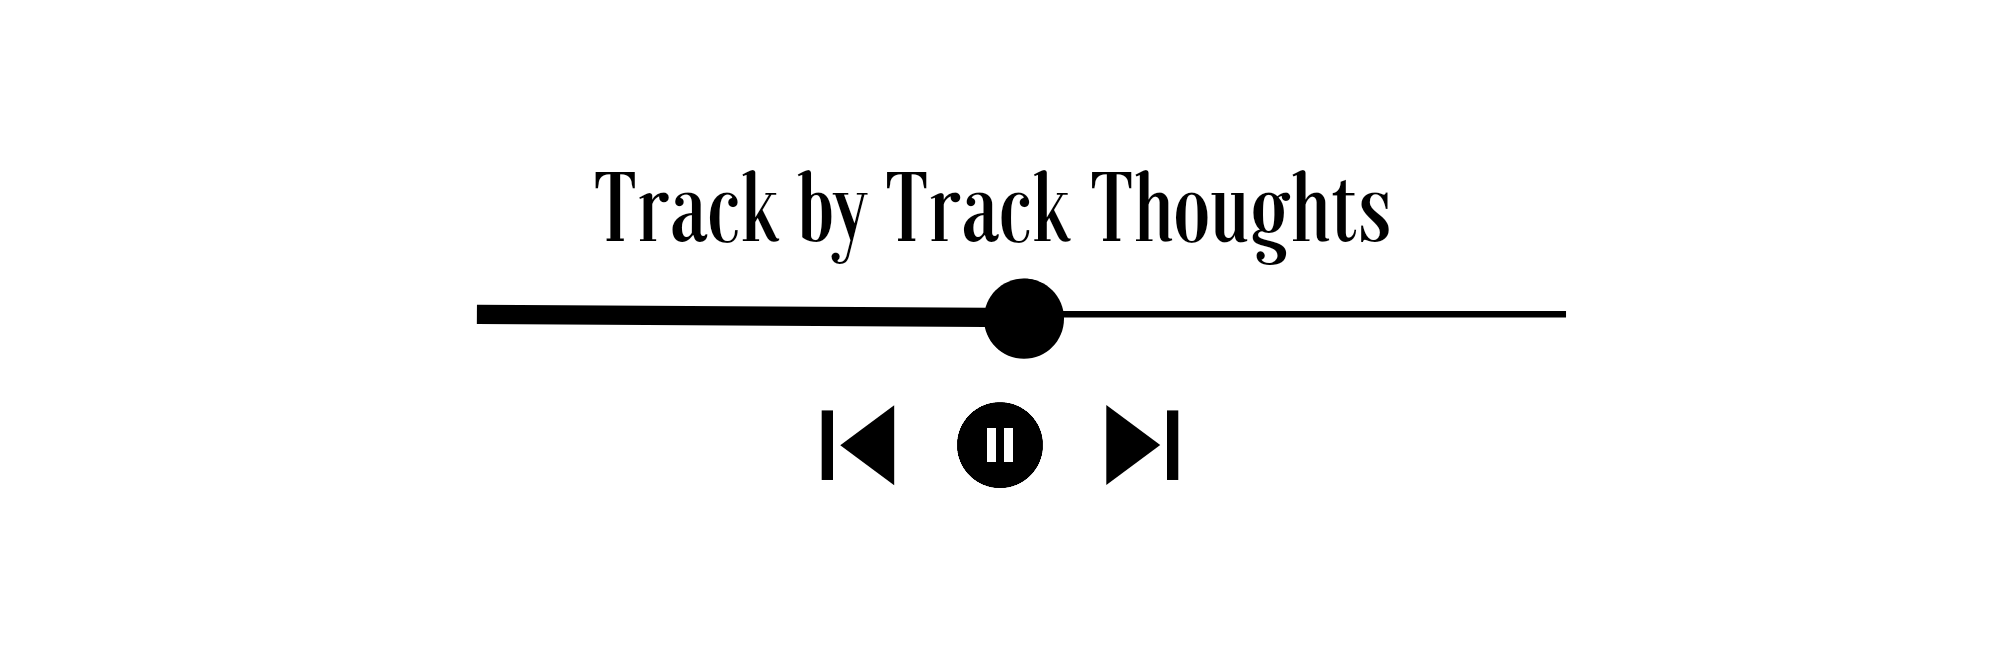 Header saying 'track by track thoughts' with audio tracker, and pause & skips button underneath.